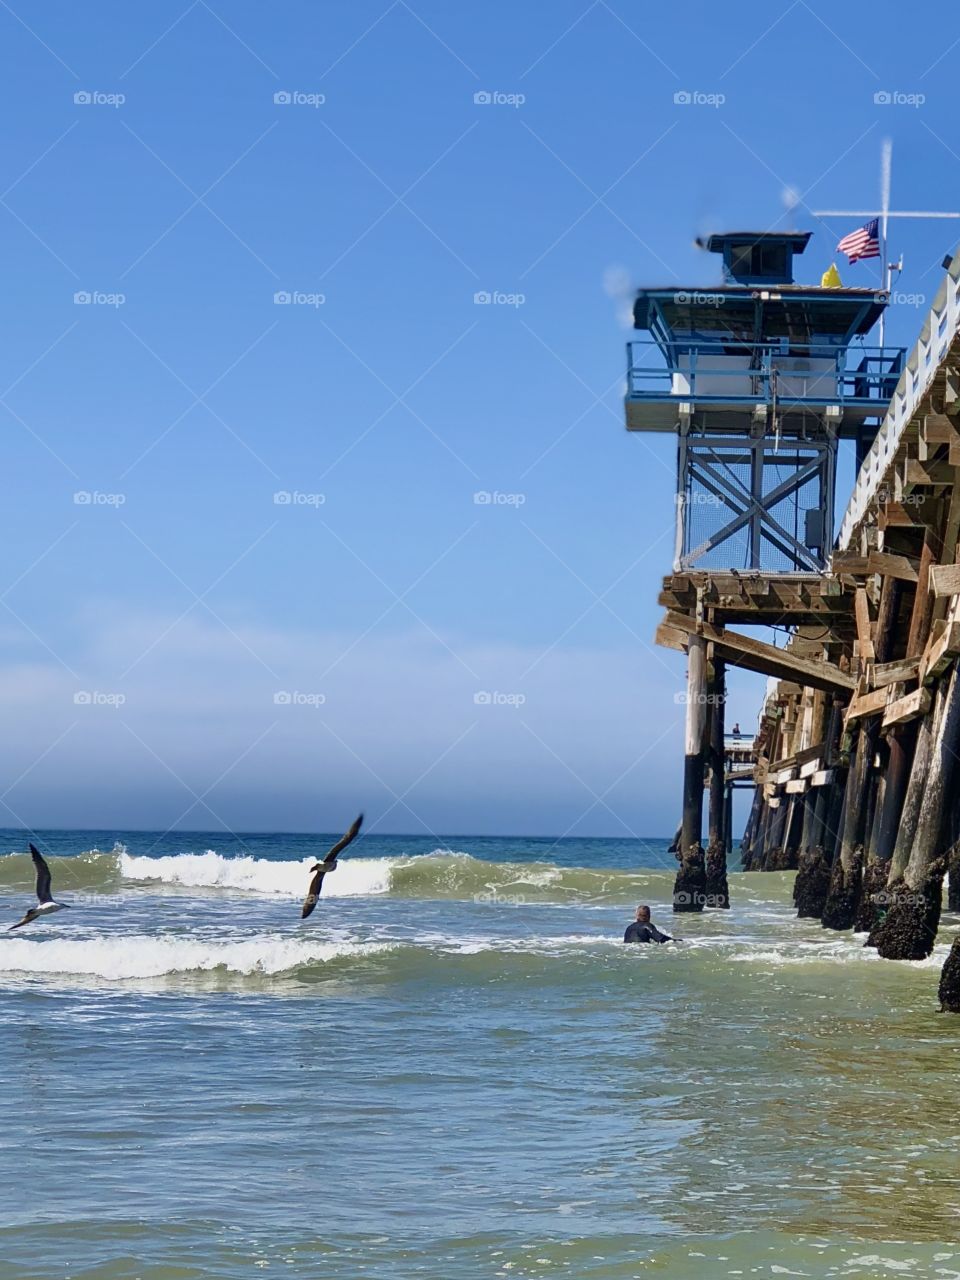 Foap Mission Vertical Captures! Surfer Next To The San Clemente Pier WTH Waves And Seagulls!